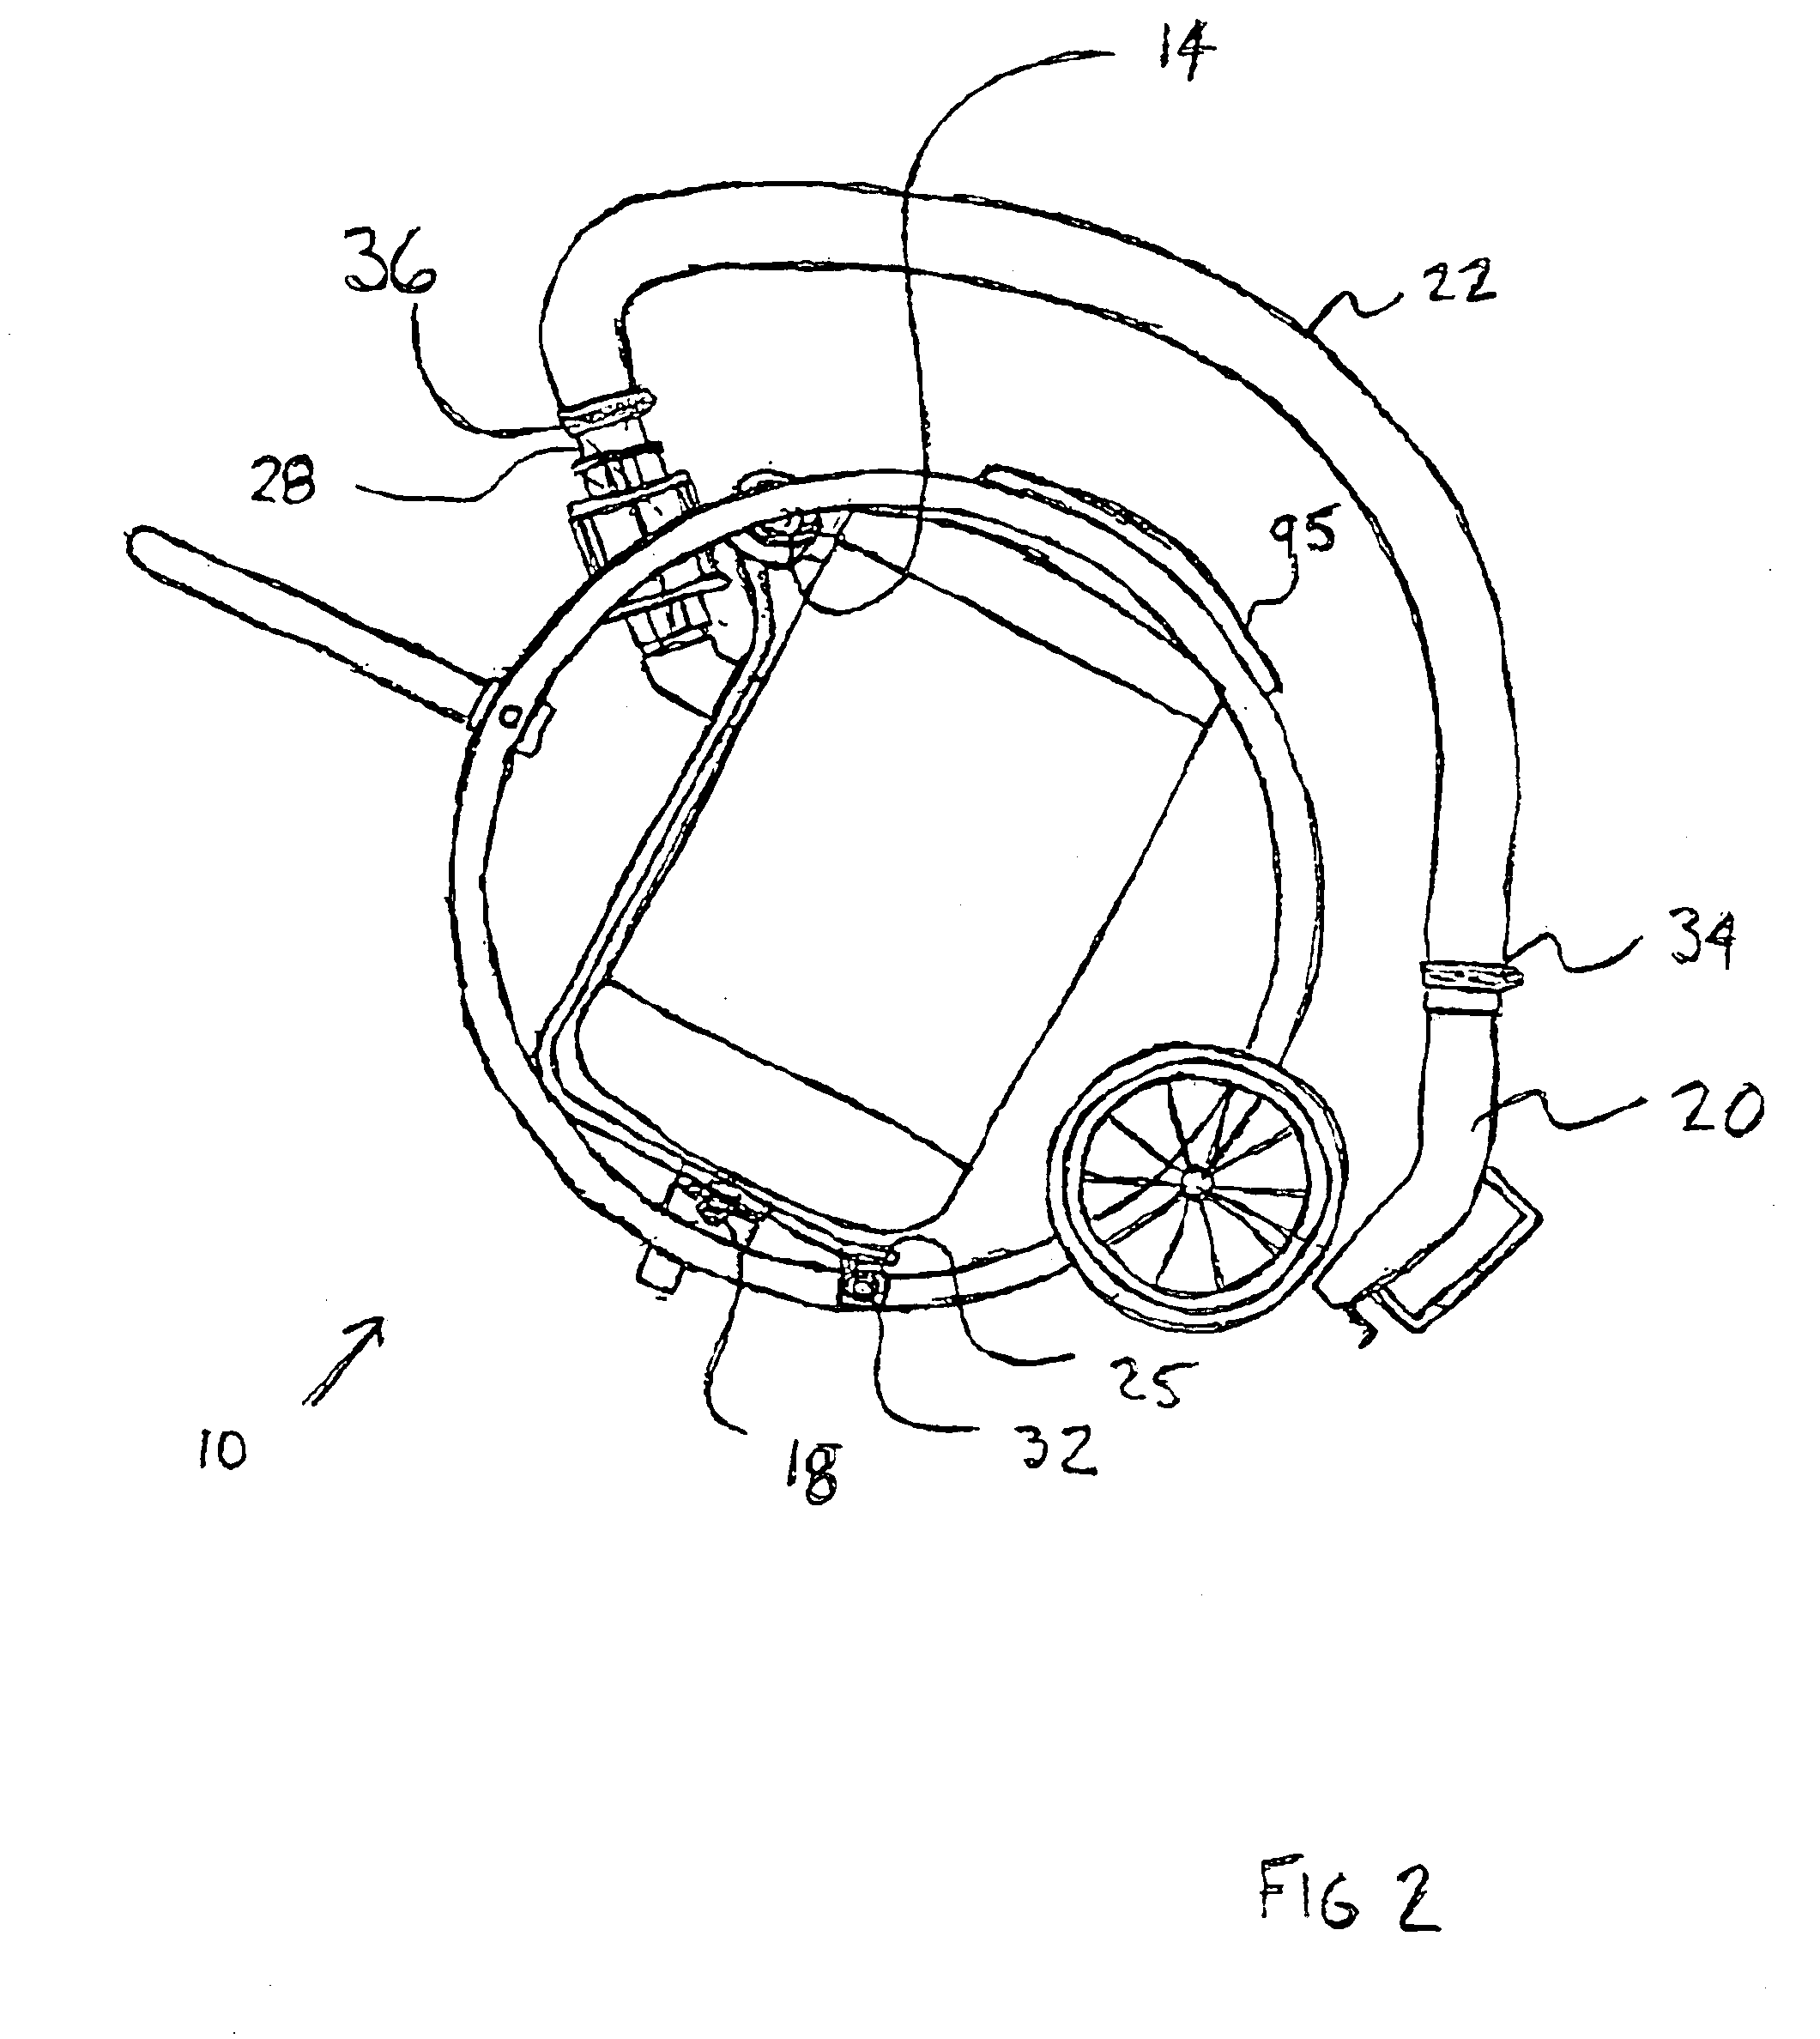 Inflating device for tires